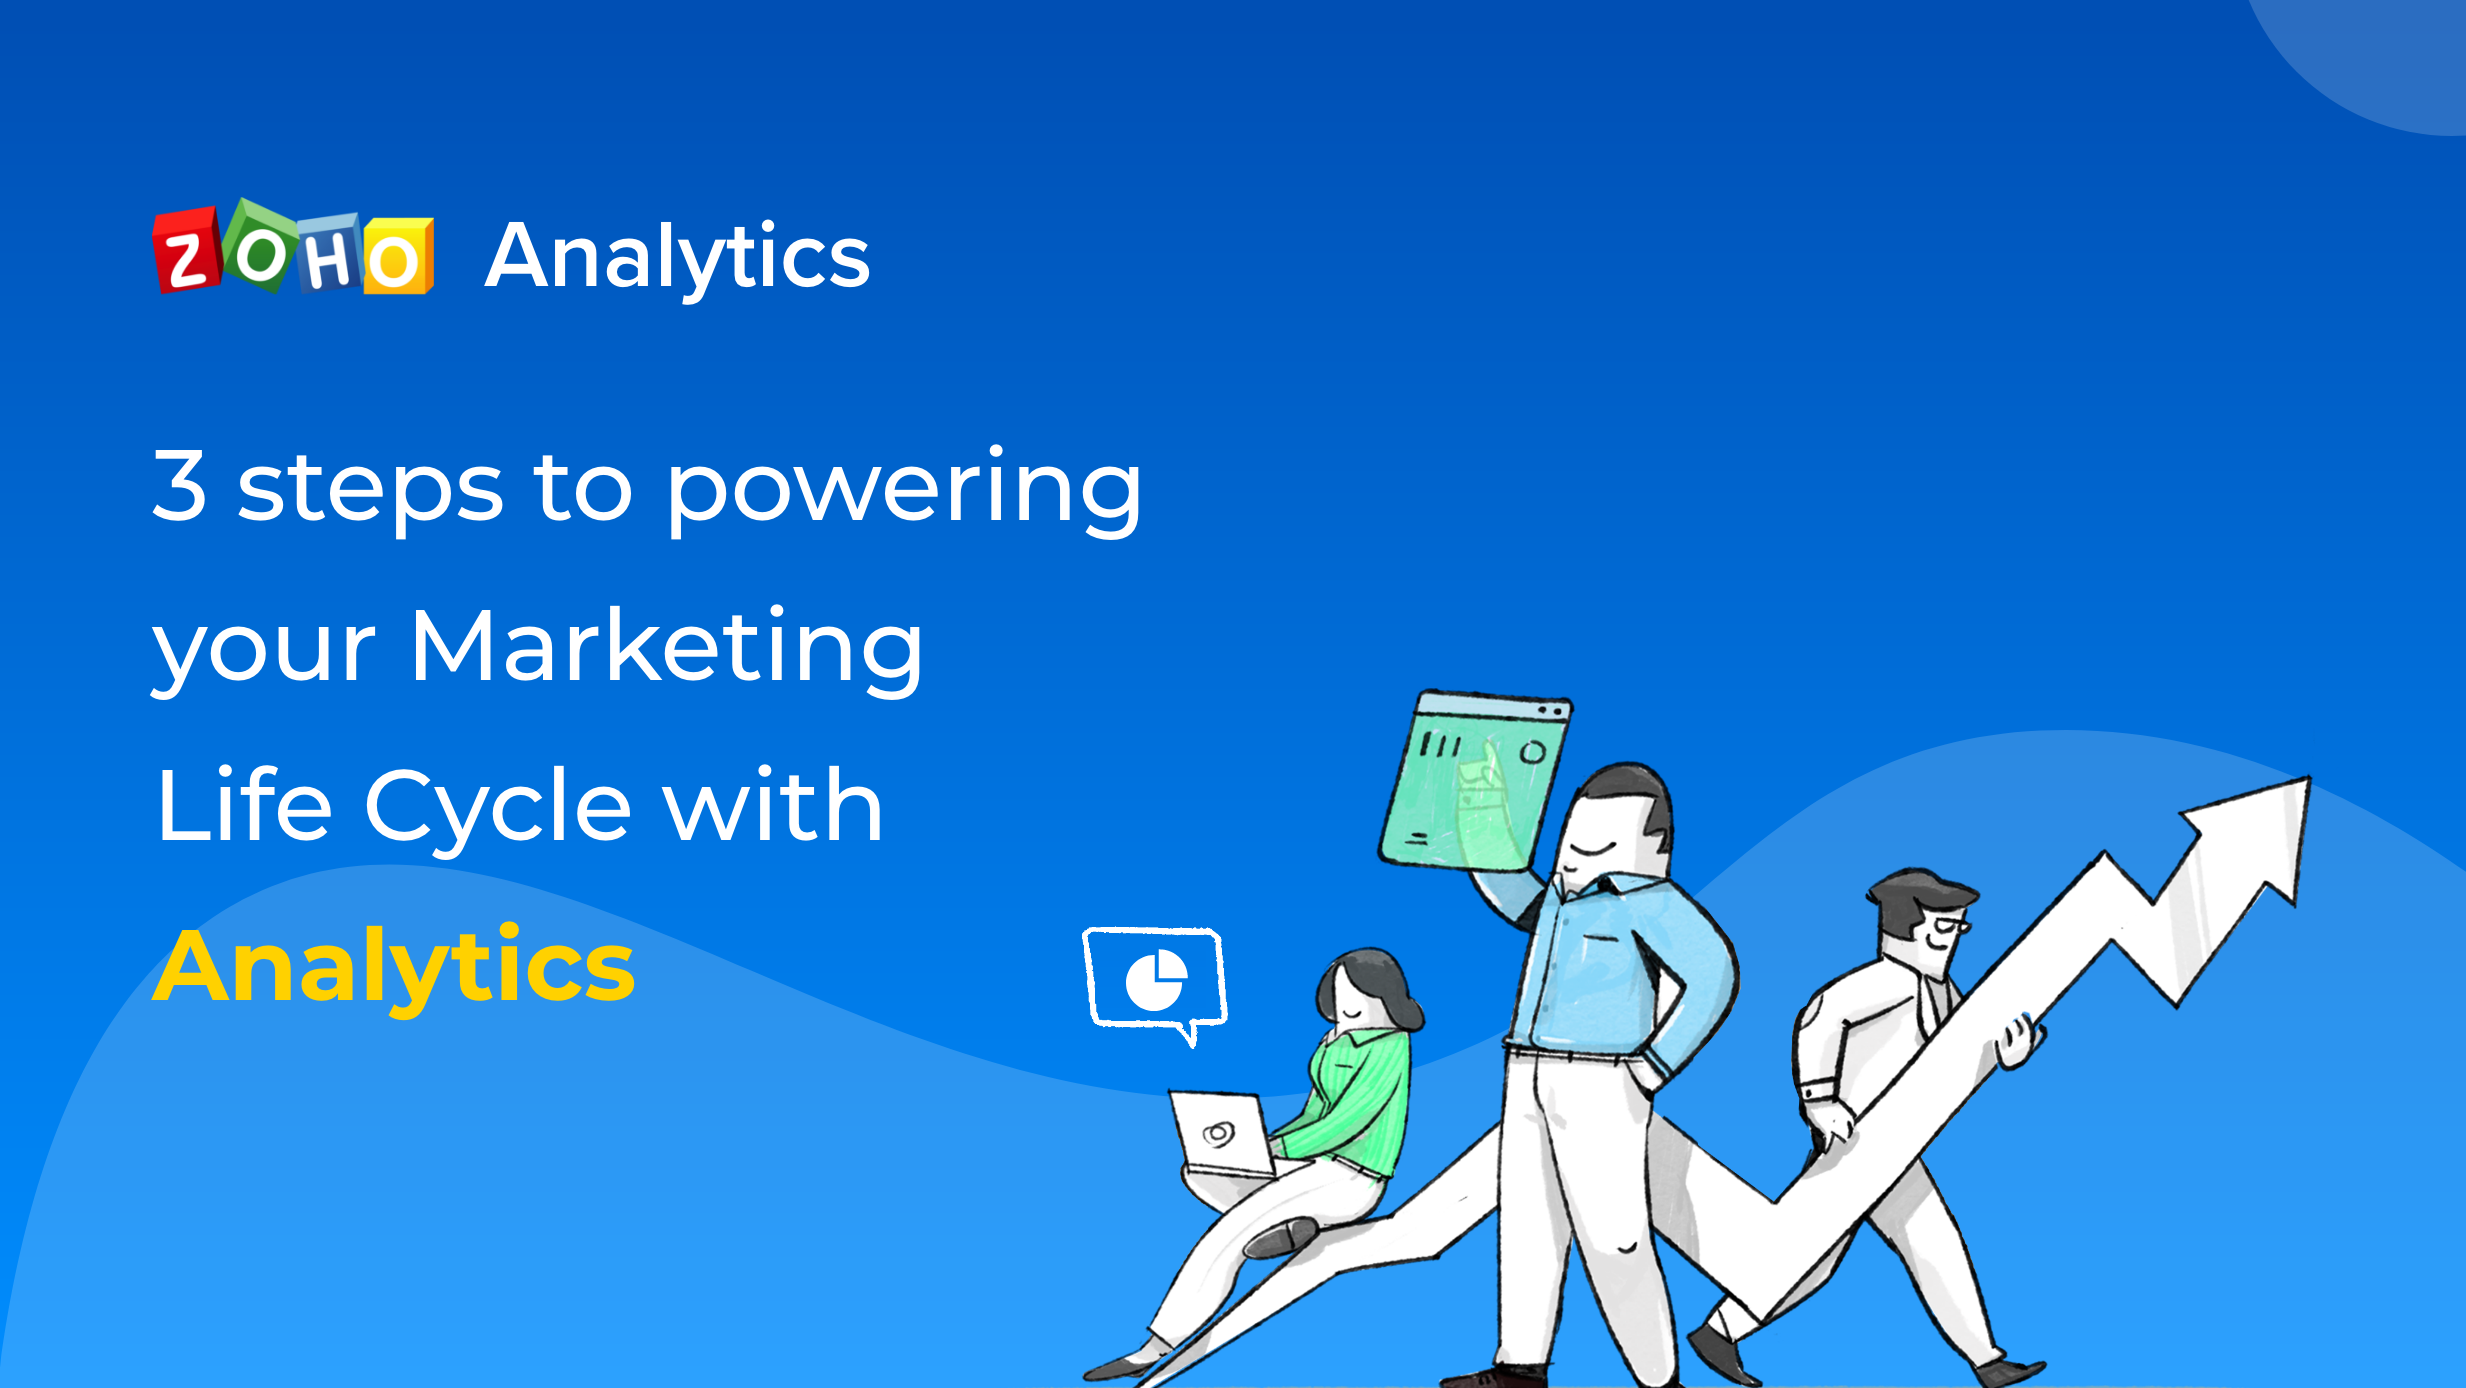 3 steps to powering your Marketing Life Cycle with Analytics